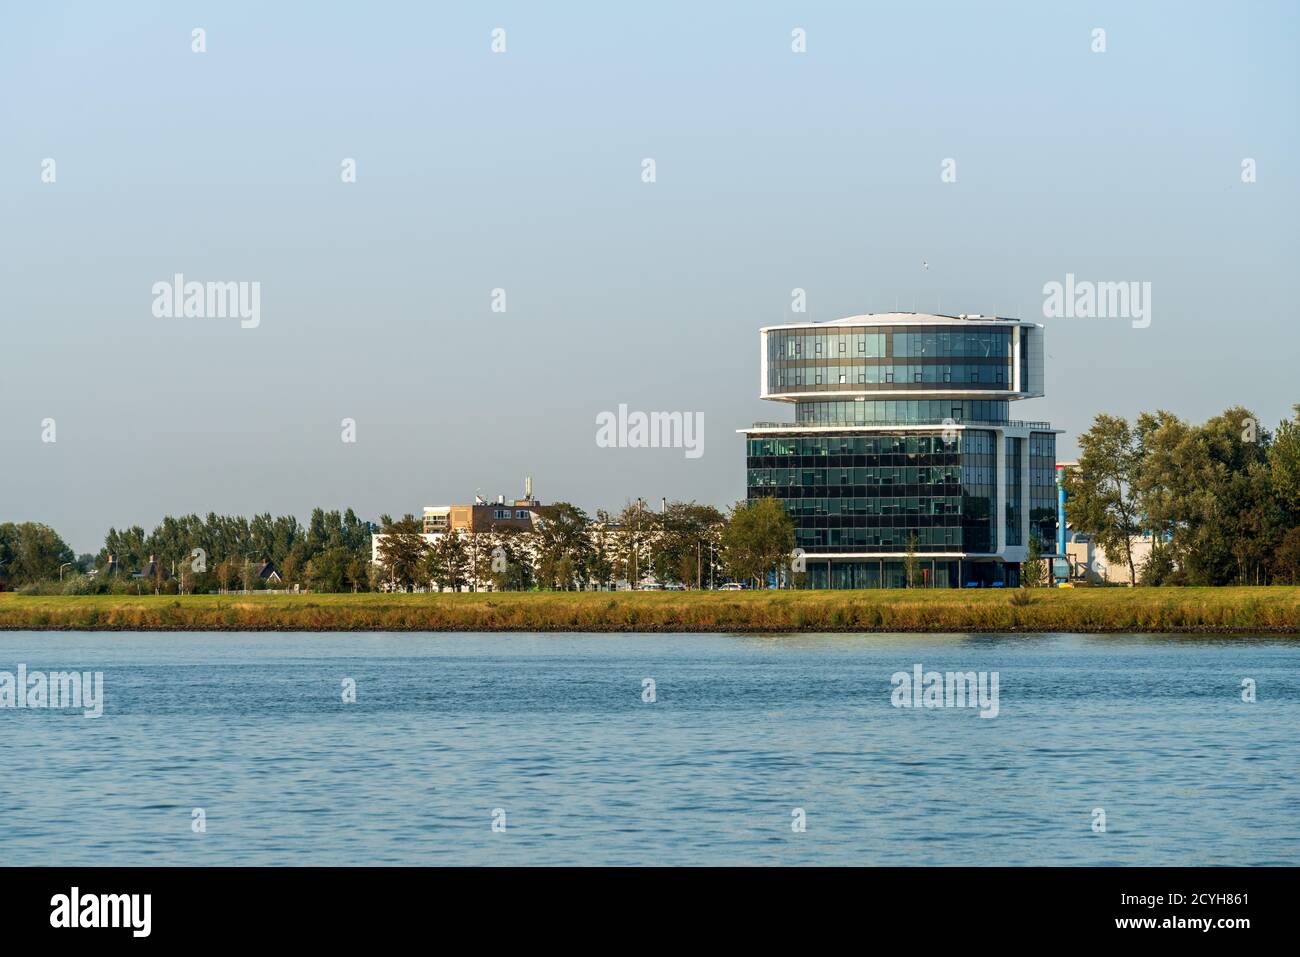 Dordrecht, Netherlands - 14 September 2020: View across the river Maas of the new Fokker head office between Dordrecht and Papendrecht. The river Maas is an important inland shipping route to Rotterdam. Stock Photo